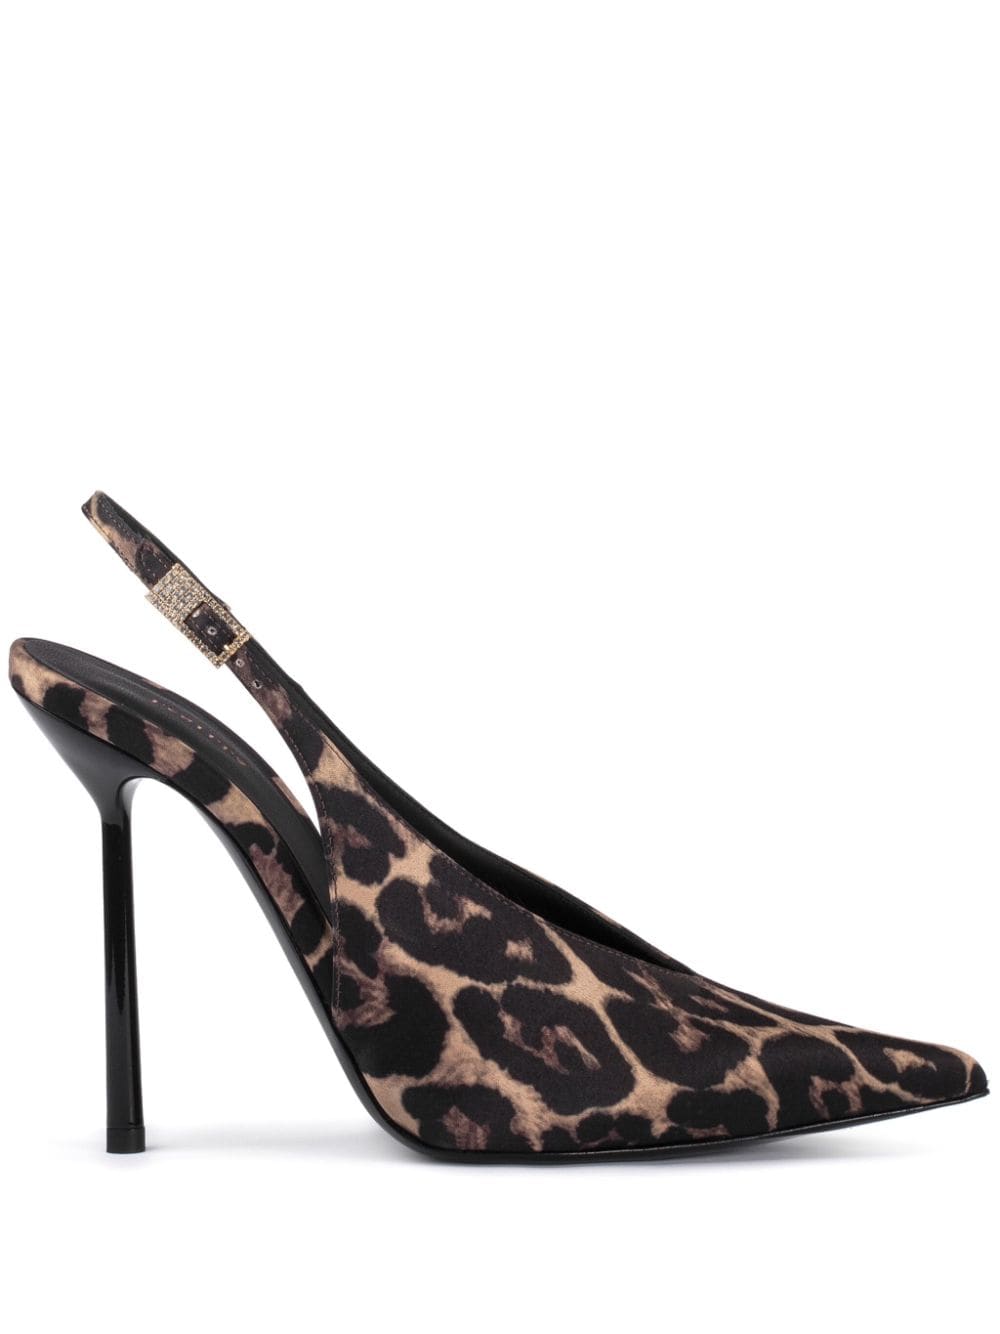 Le Silla Clivage Leather Pumps In Animal Print